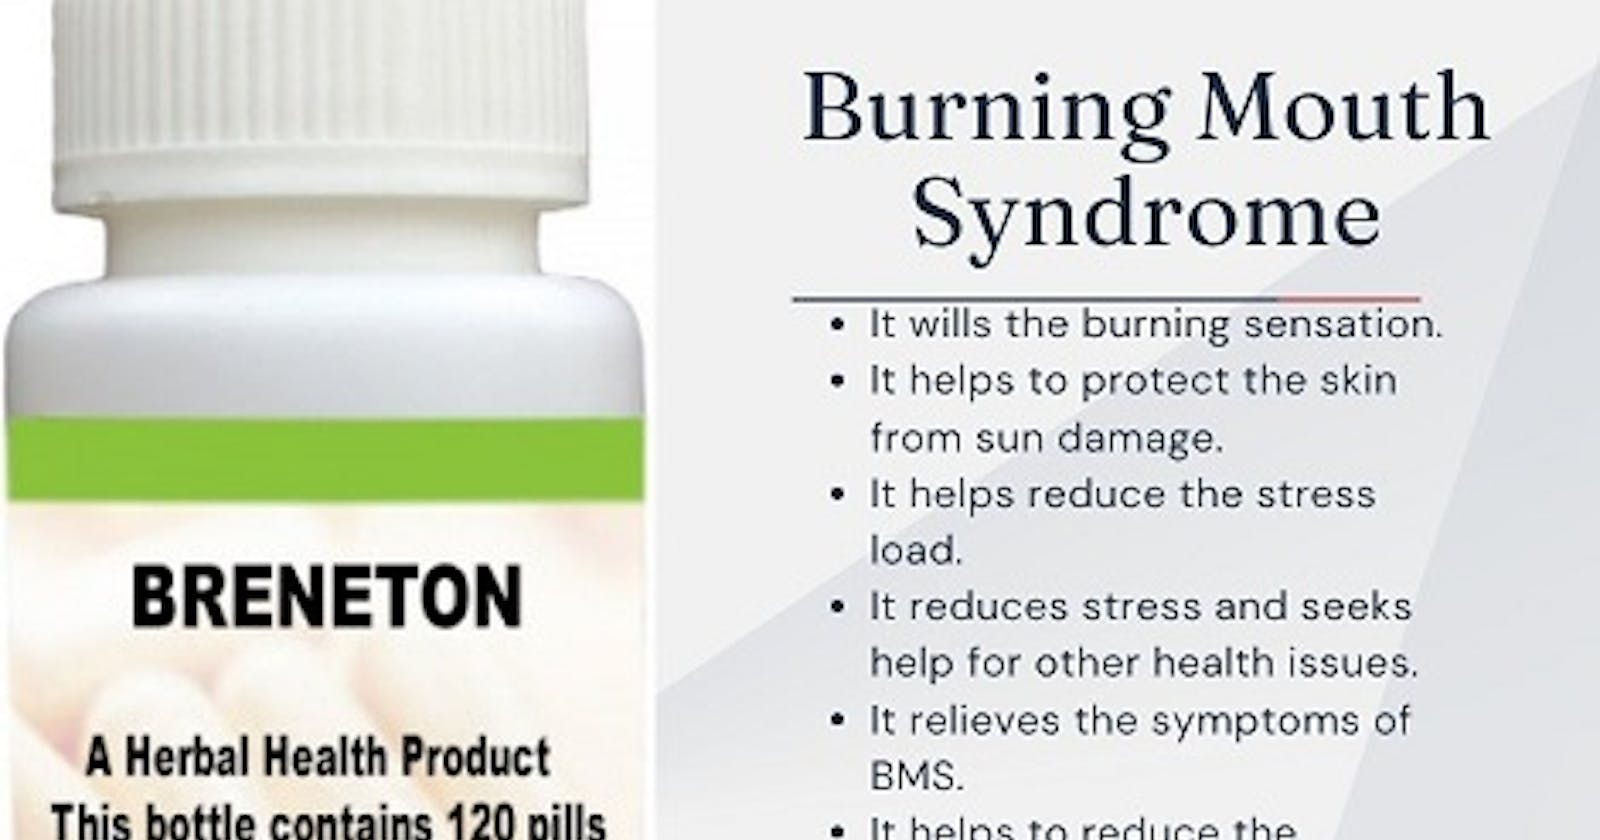 Managing Burning Mouth Syndrome with Natural Remedies